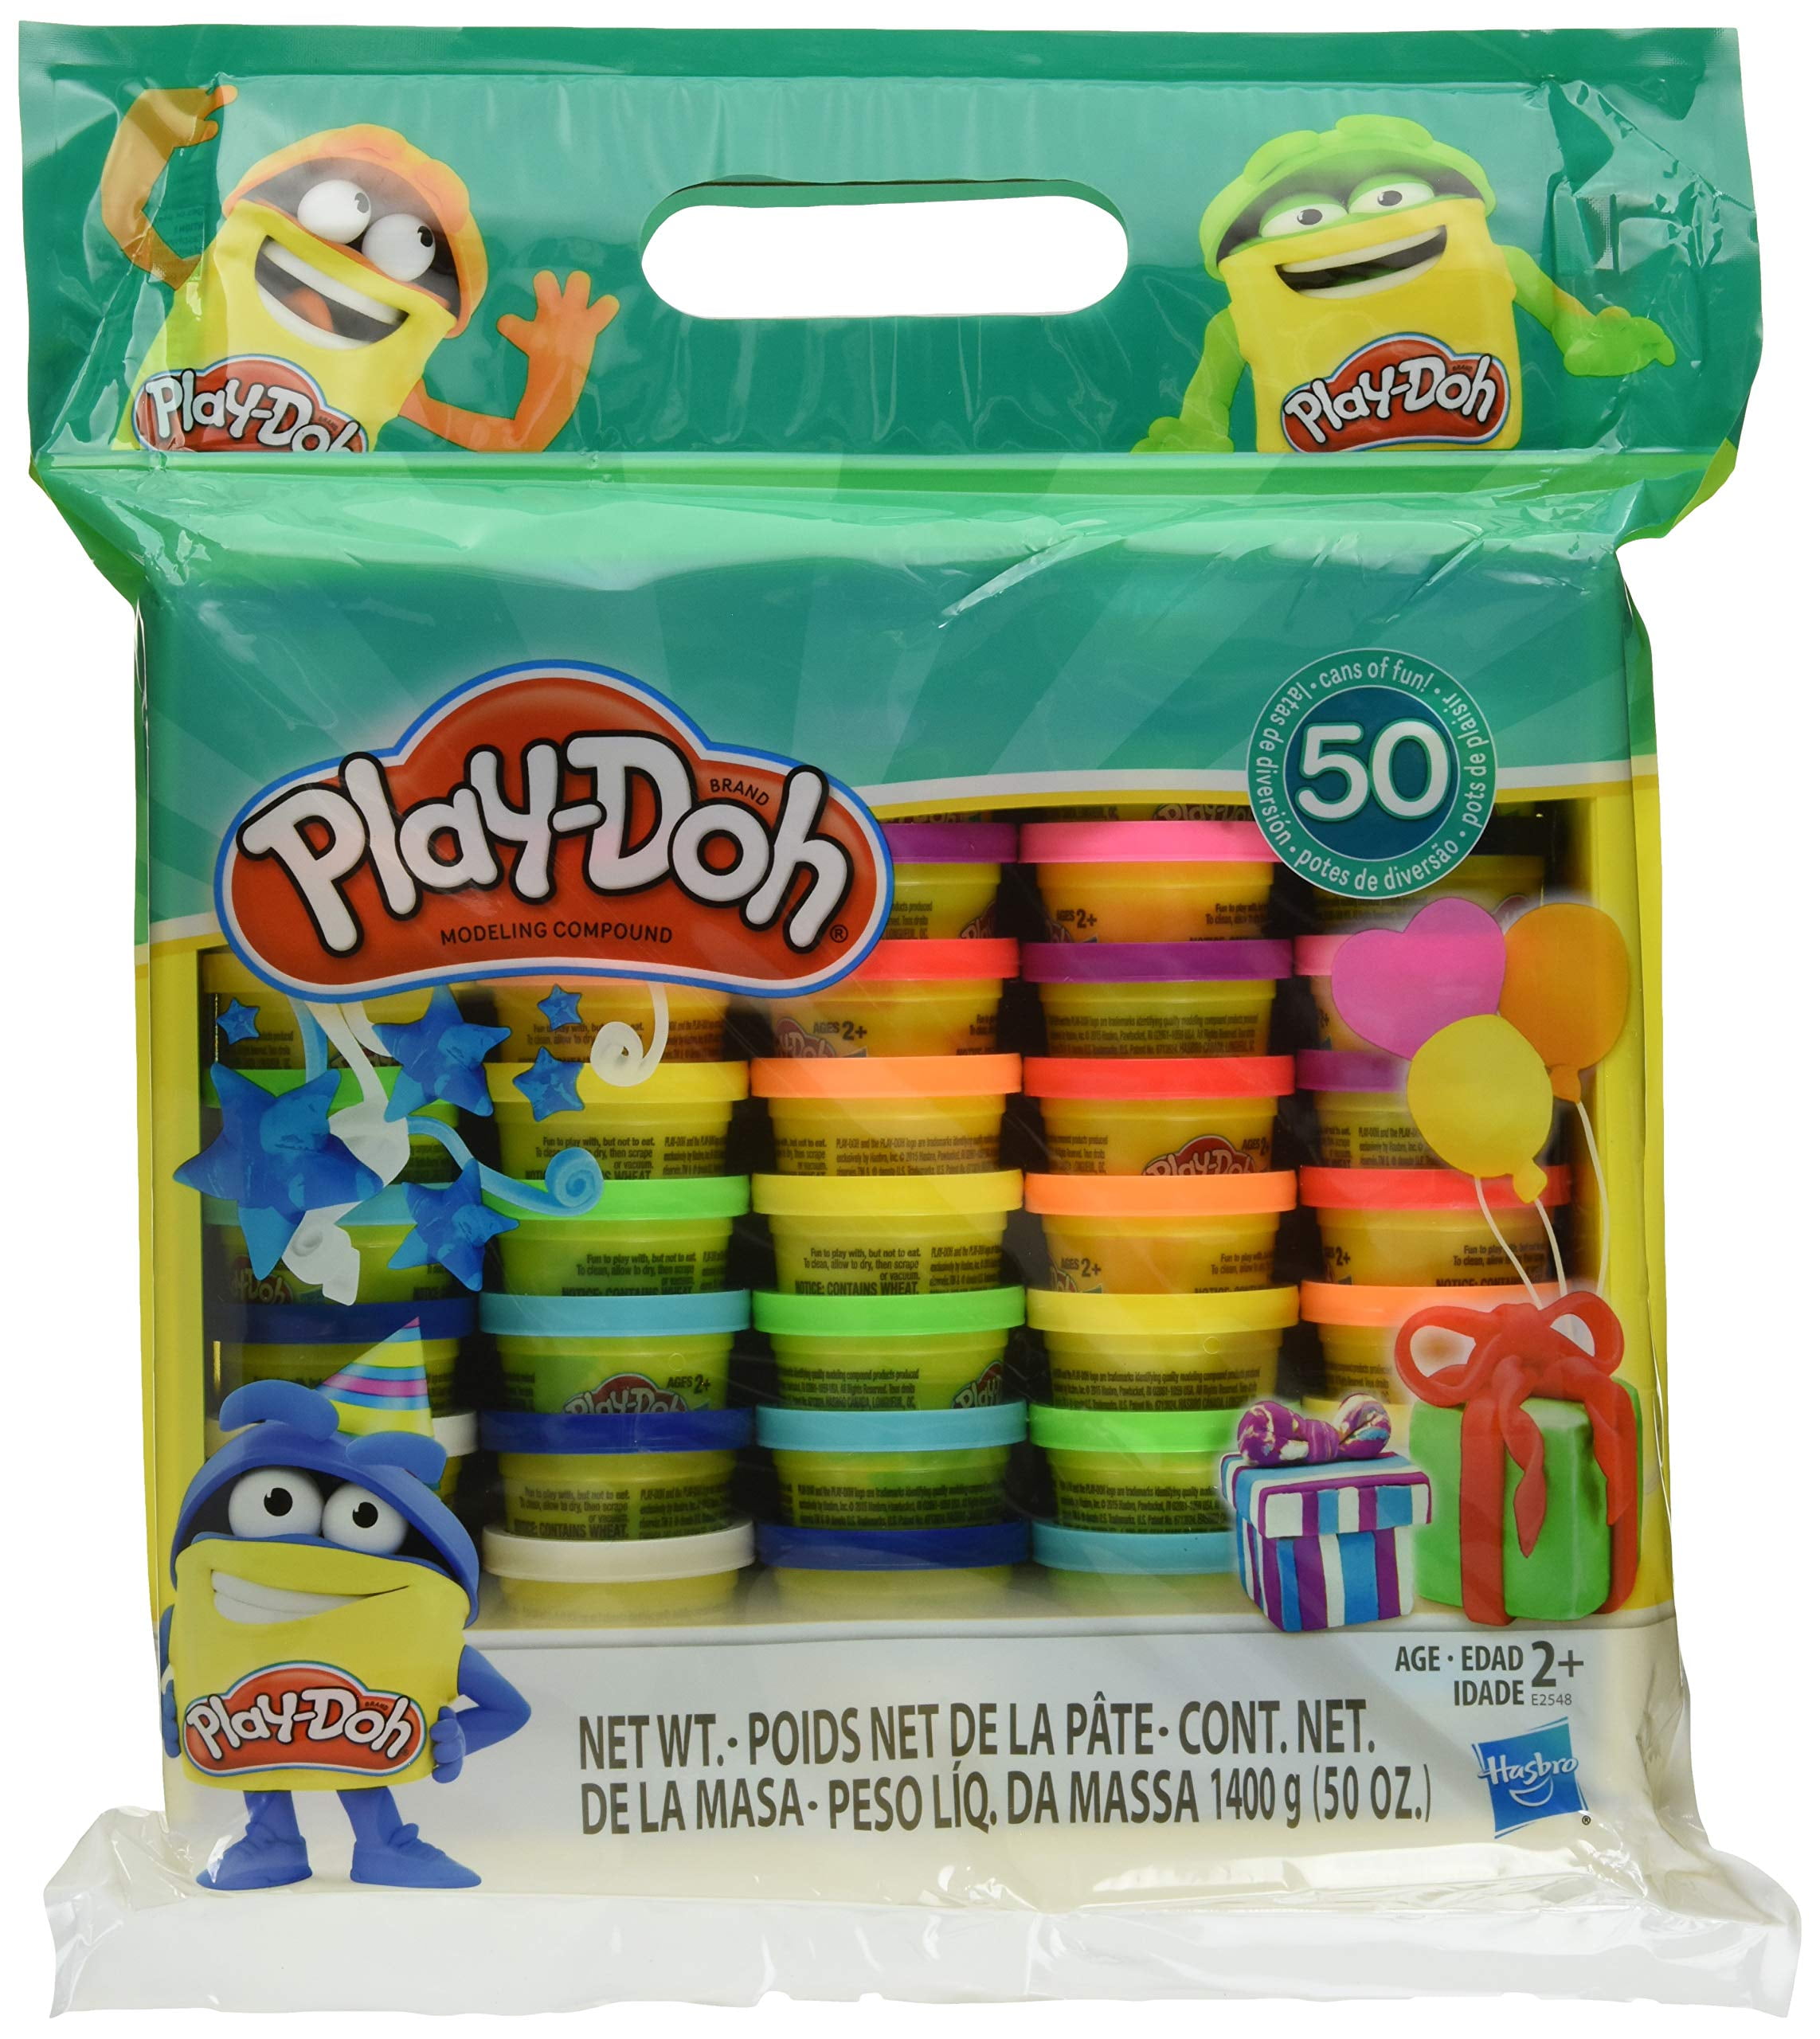 10 Pack Play-Doh Modeling Compound Case Colors Non-Toxic Assorted 2 OZ Cans Kids 